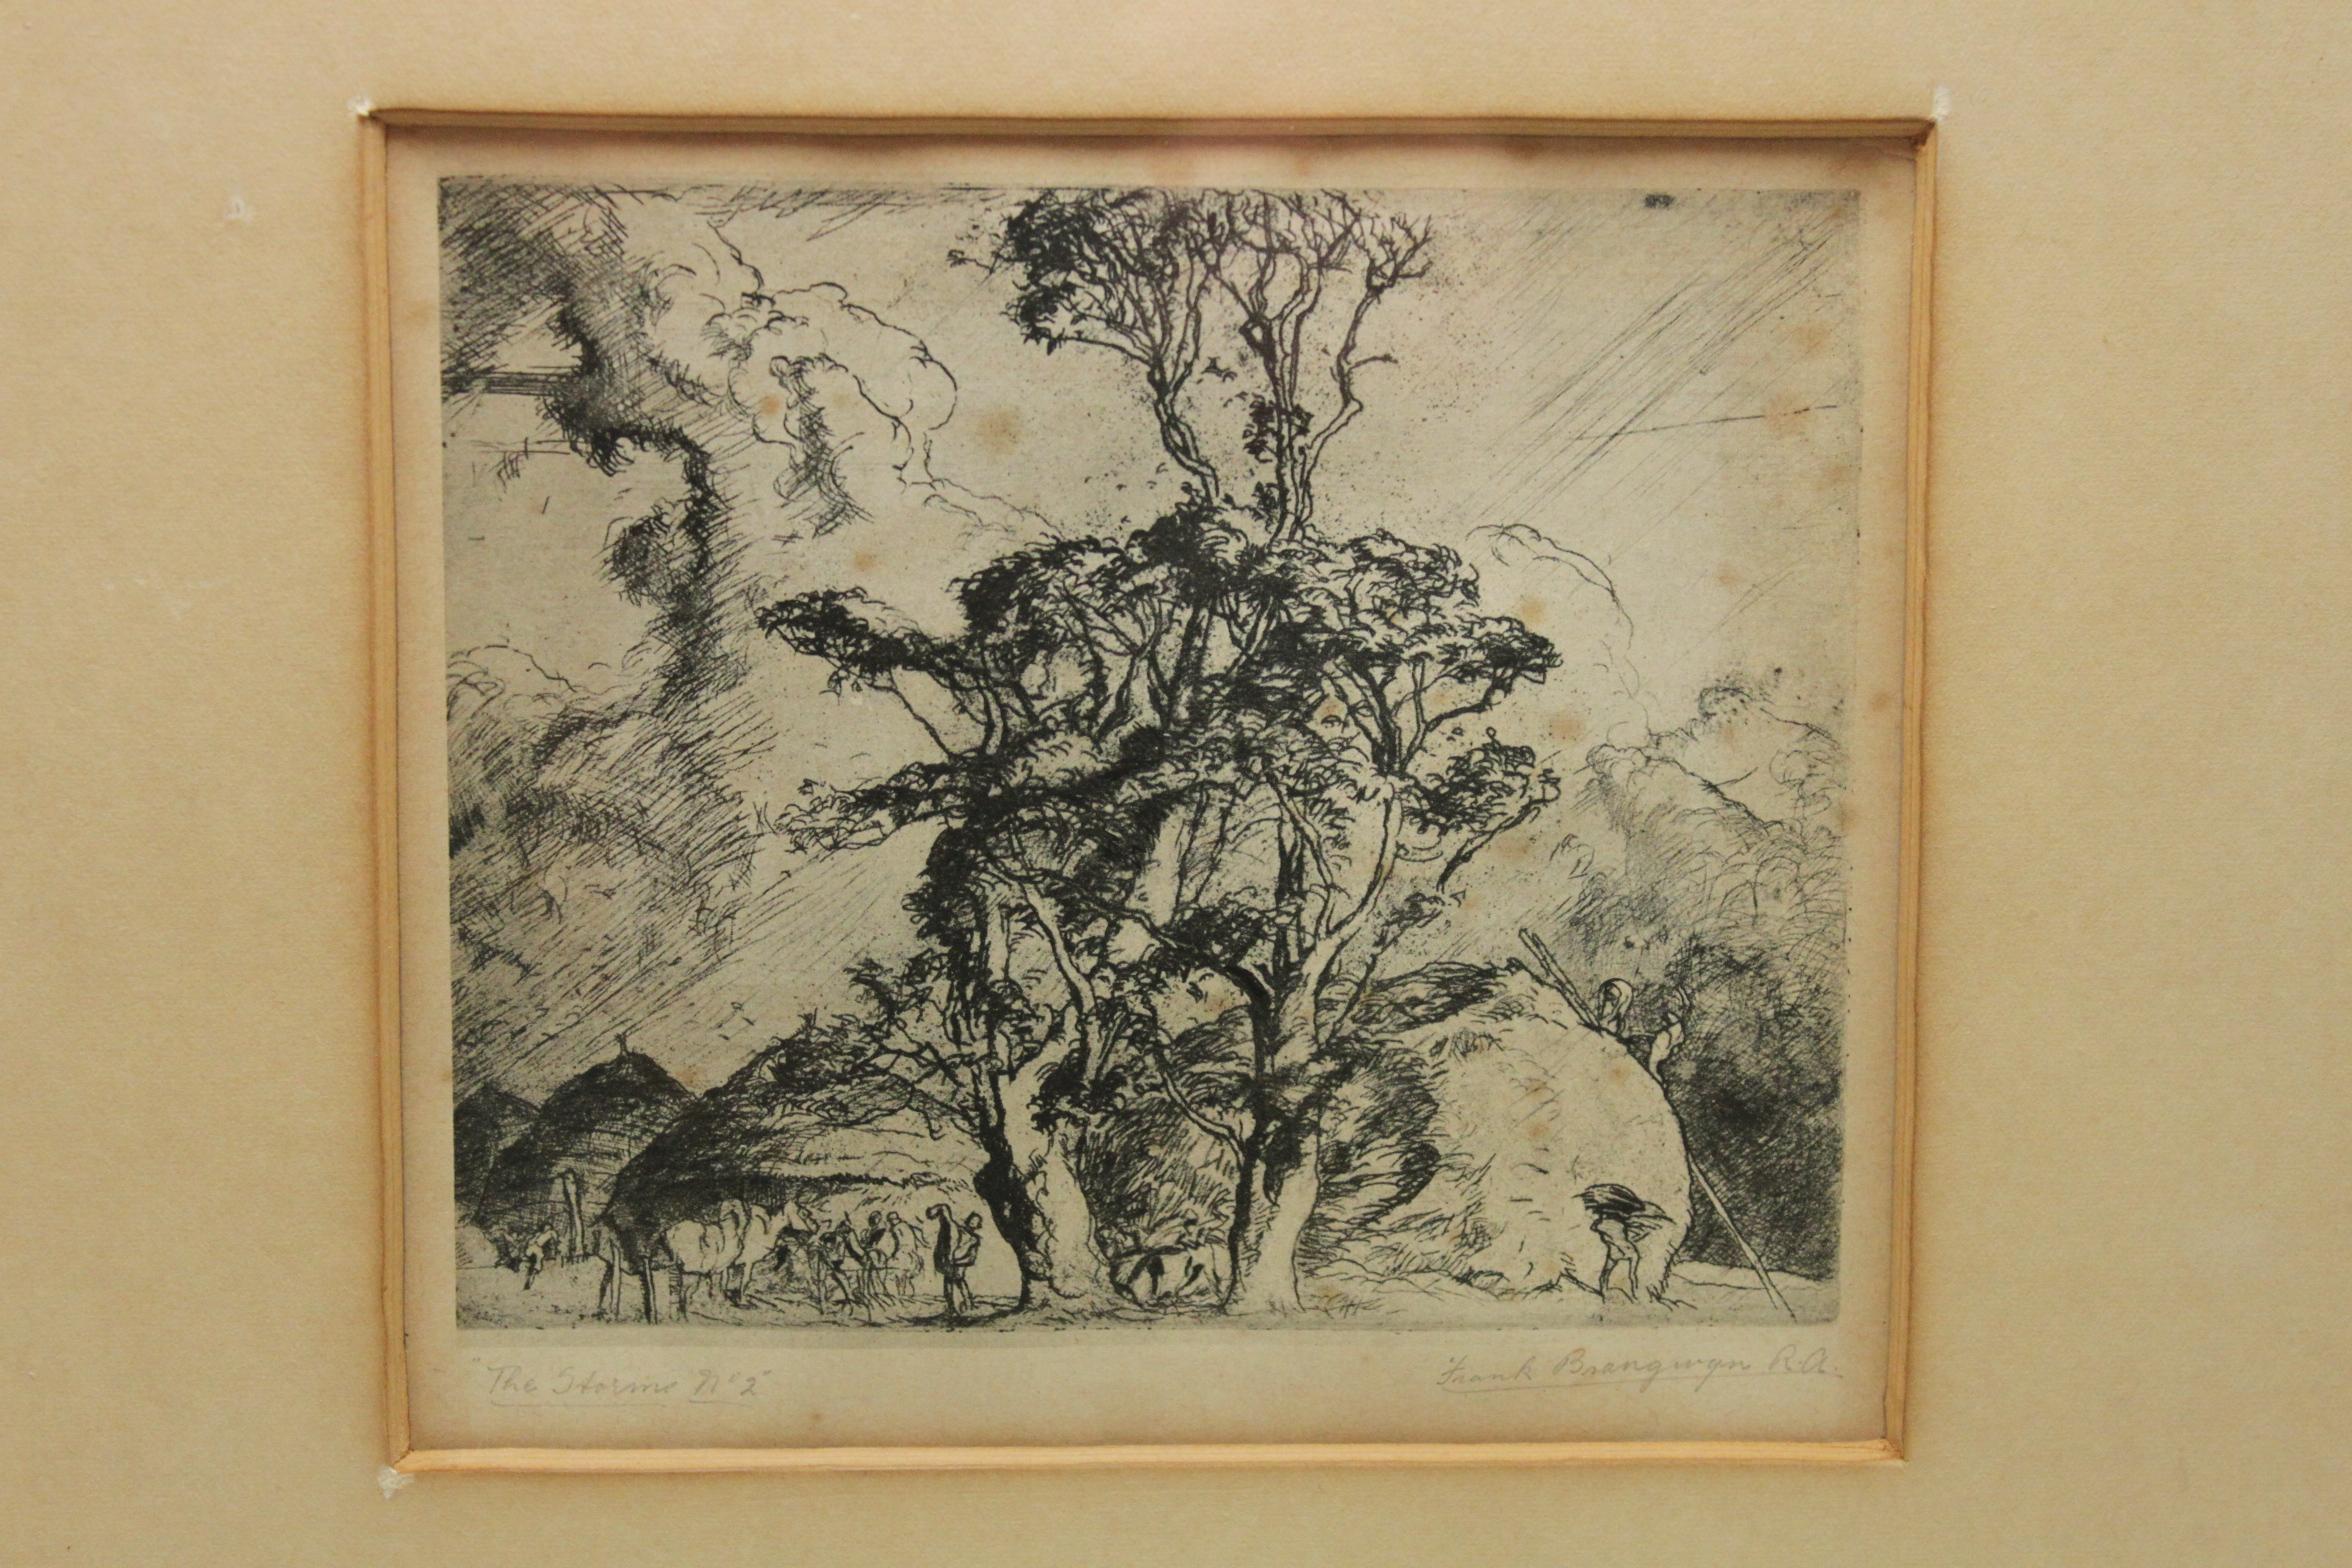 At the bottom left of this etching by Frank Brangwyn (1867-1956) is the title, written in pencil, 